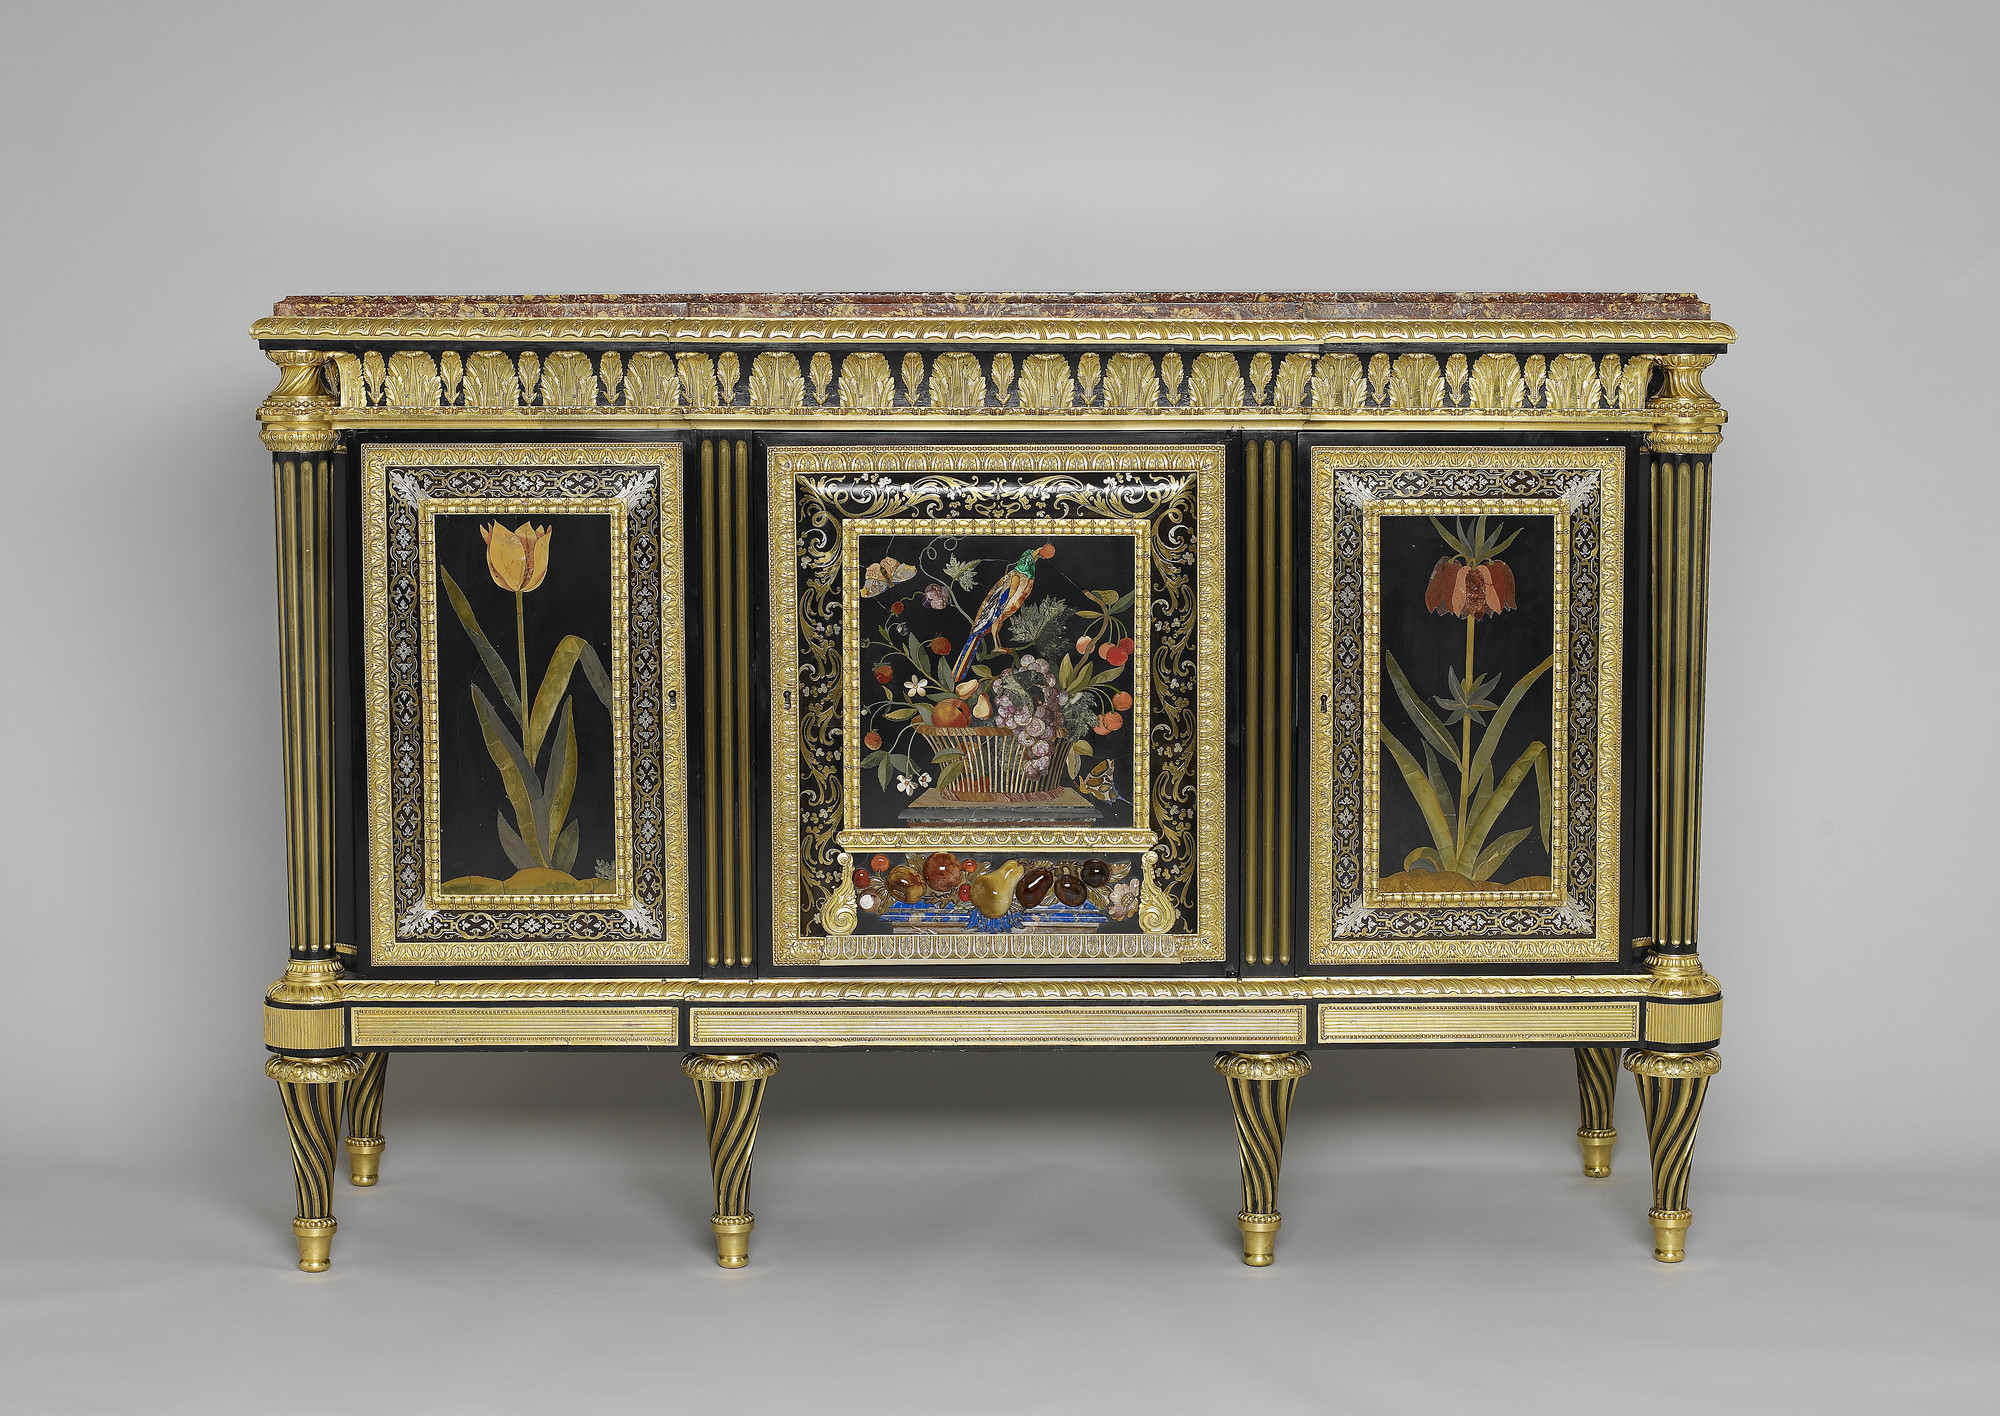 Rectangular cabinet veneered with ebony and set with three pietra dura panels of flowers and birds, the central panel incorporating high relief pietra dura fruit; bordered with premiere partie boulle marquetry on tortoiseshell. Fitted with three doors con